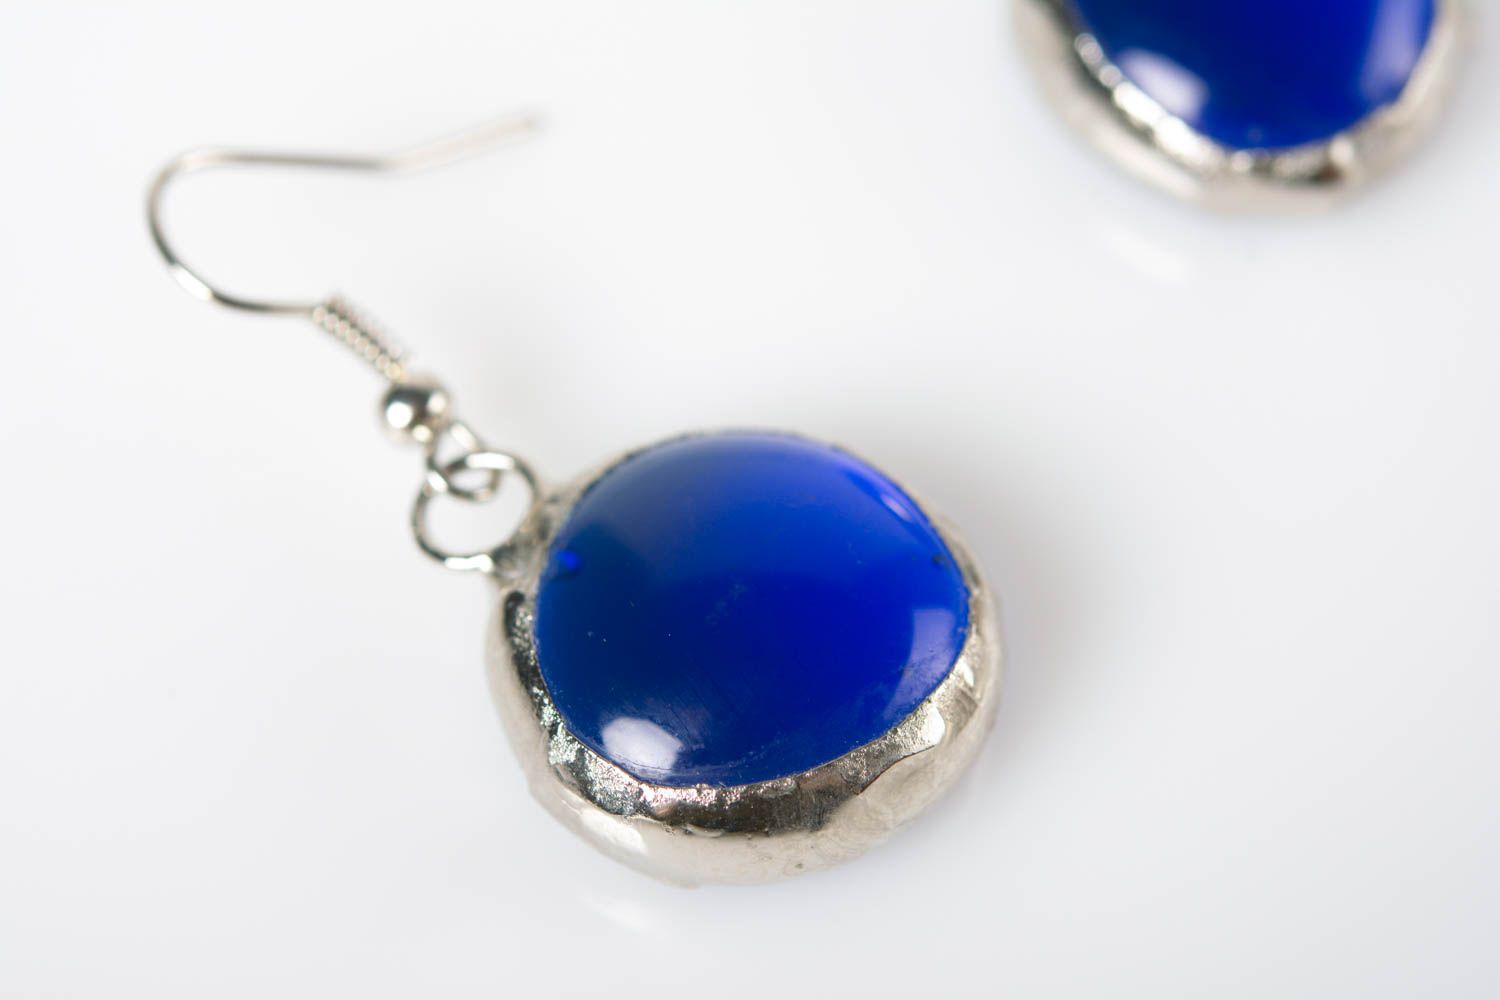 Handmade designer unusual round blue earrings made of glass and metal photo 2